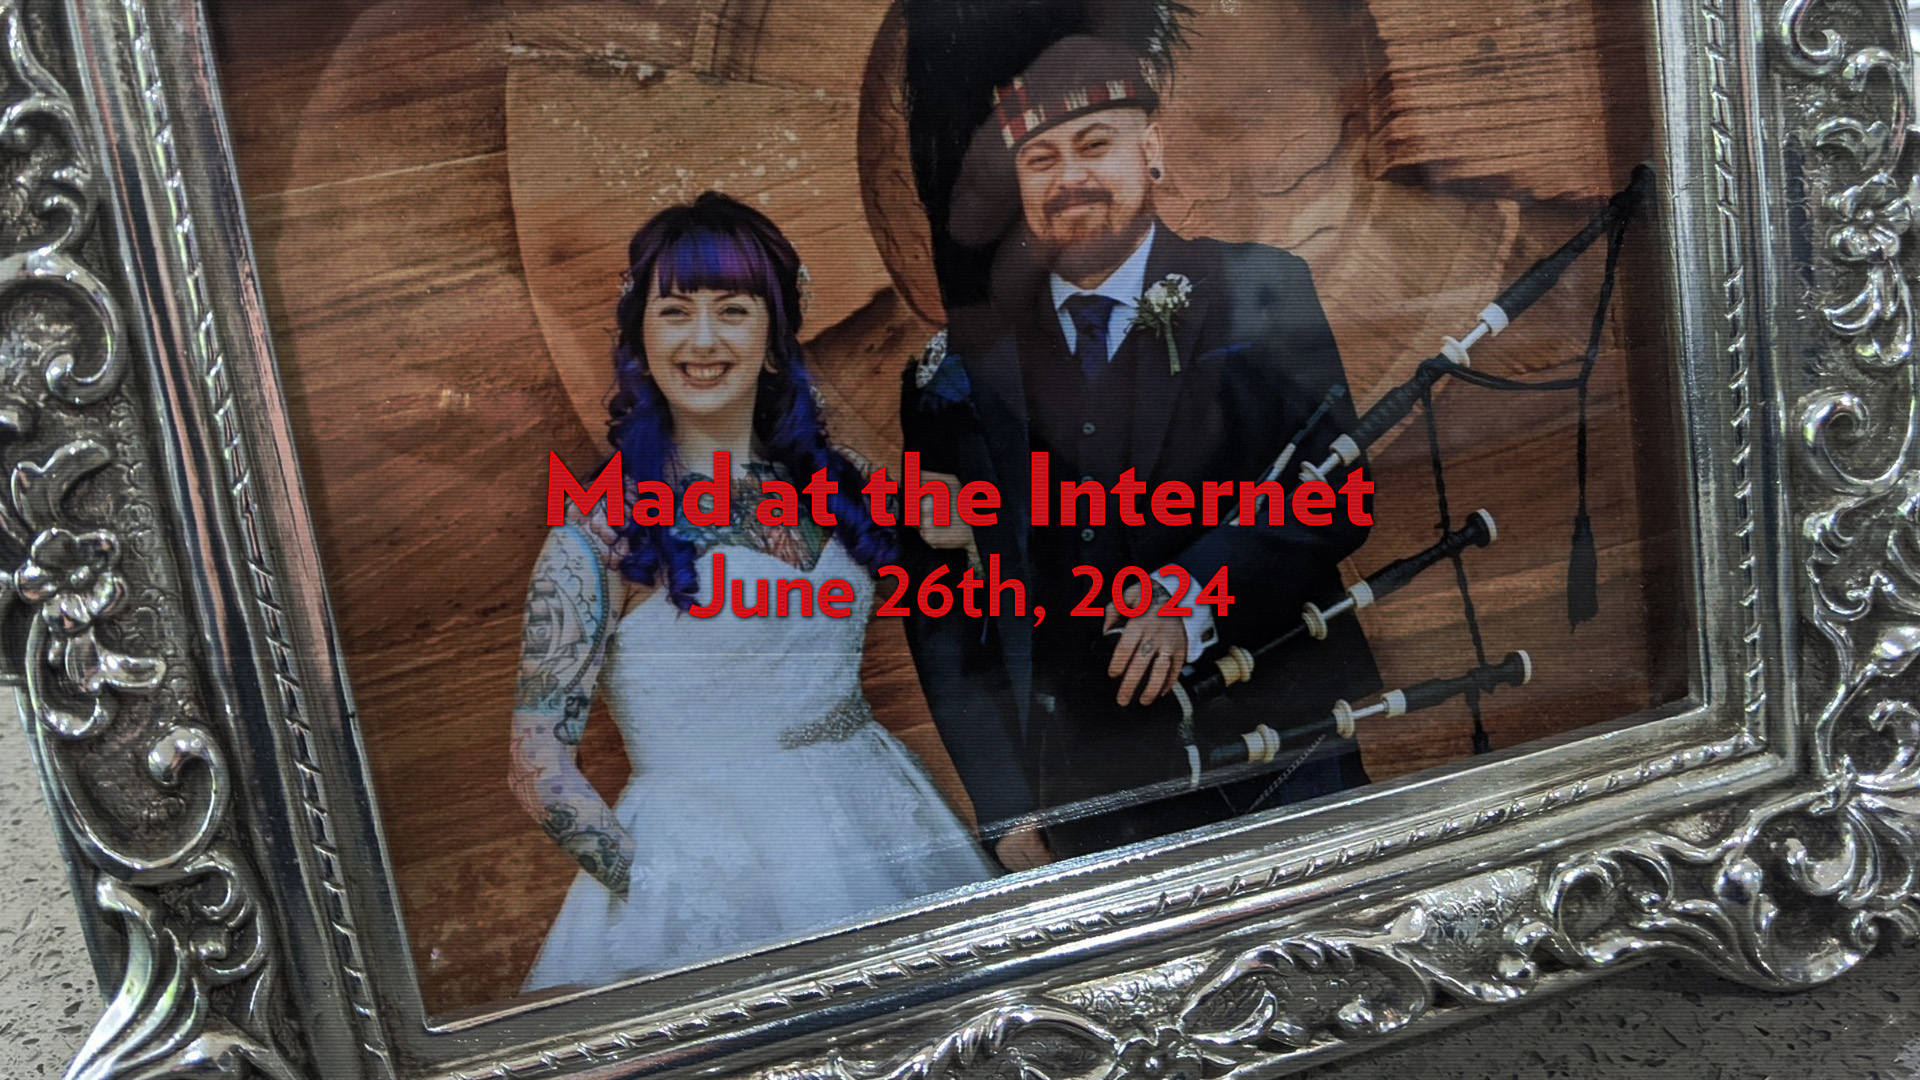 Magna Scata (June 25th, 2024) - Mad at the Internet